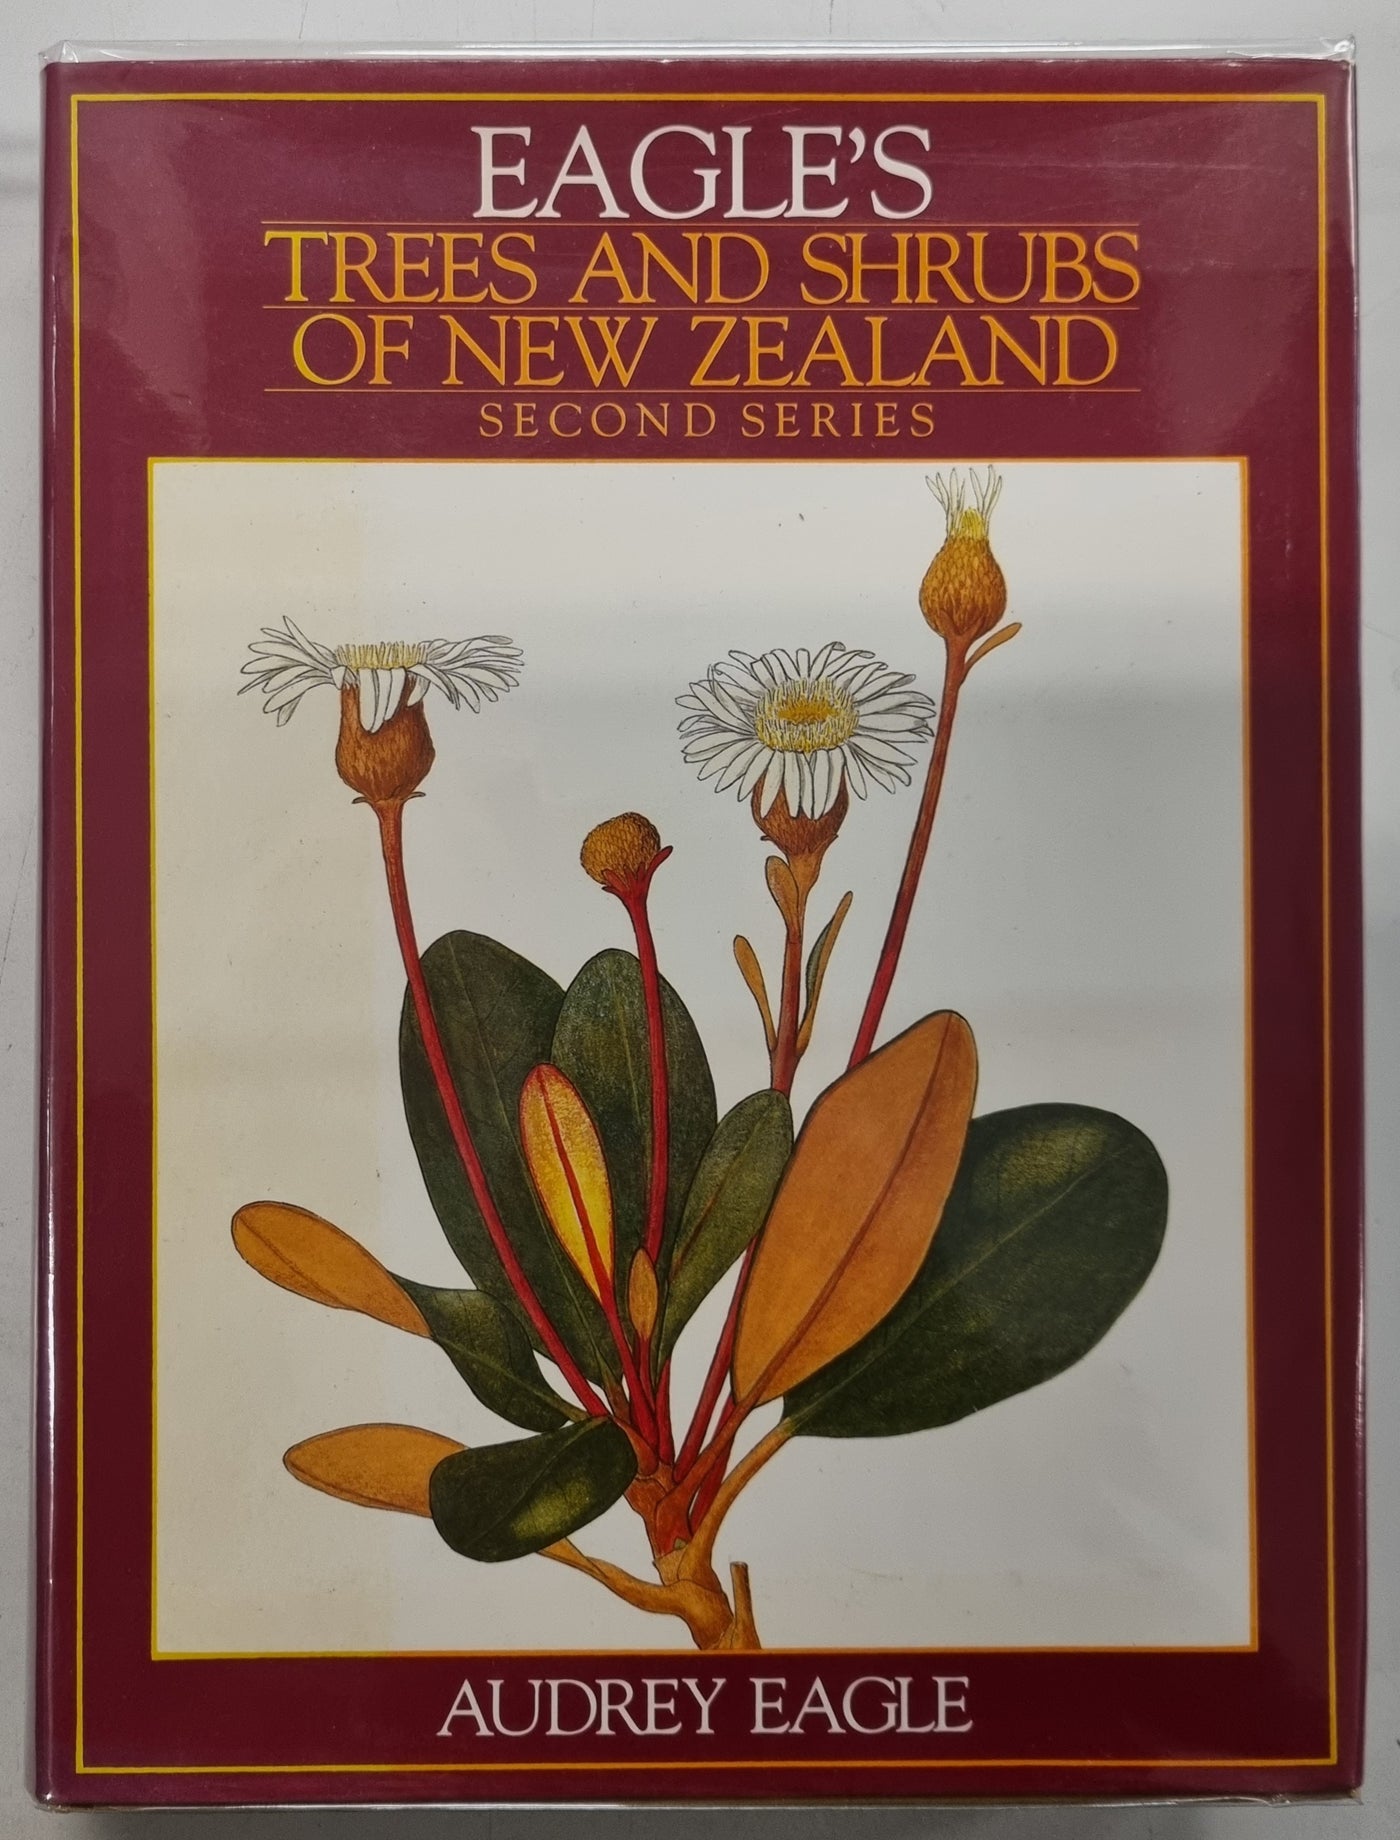 Eagle's Trees and Shrubs of New Zealand: Second Series